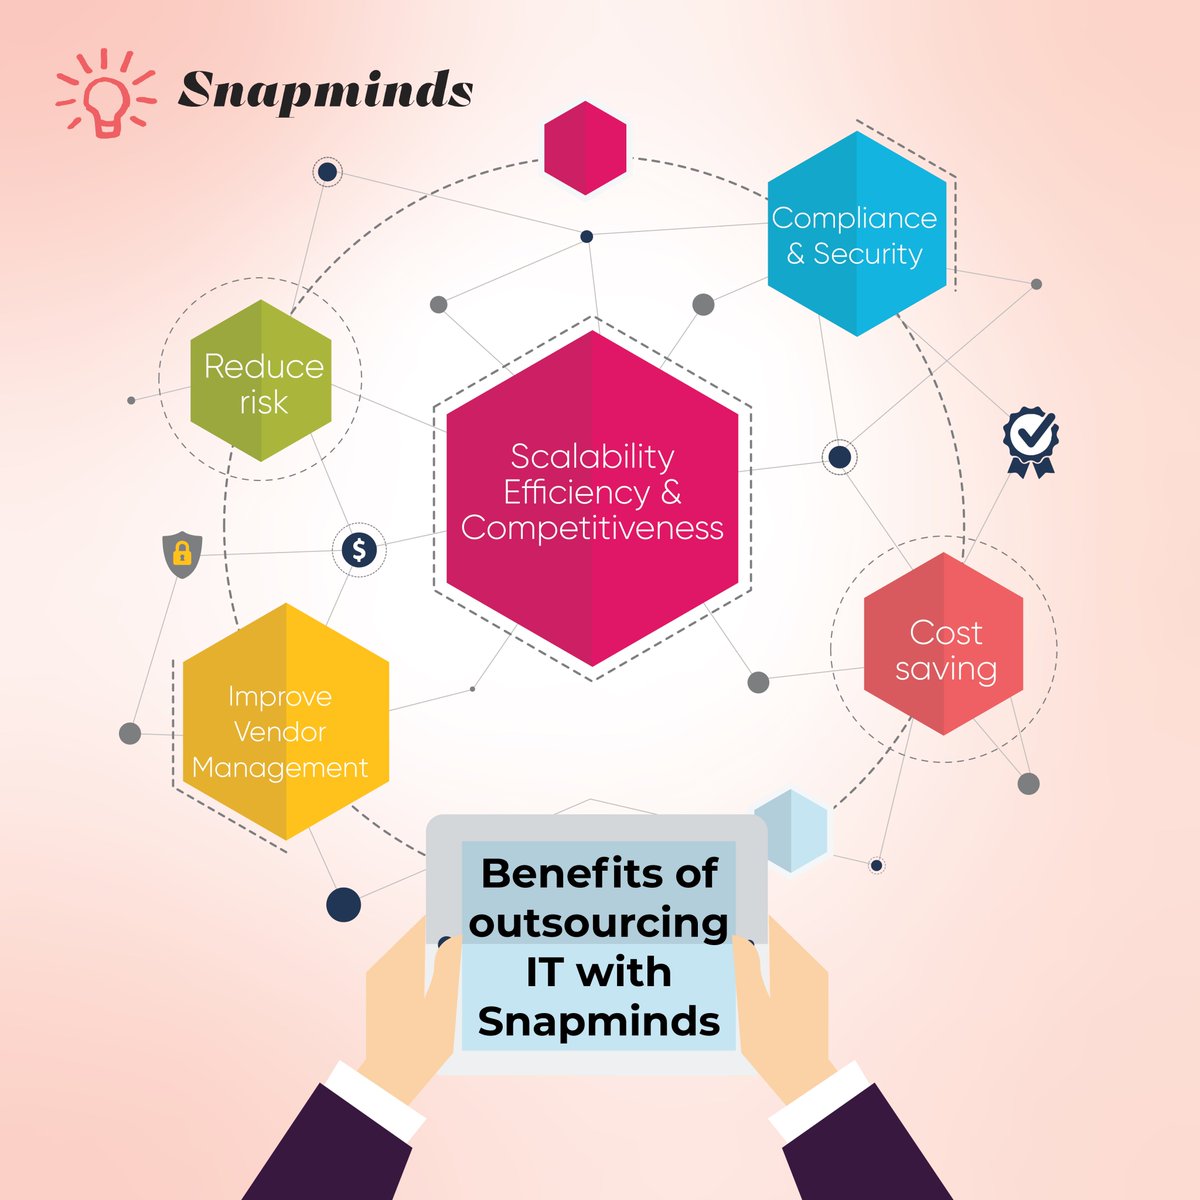 The benefits of outsourcing IT with Snapminds include

Access to expertise
Cost savings
Increased efficiency
Scalability
Access to cutting-edge technology

#snapminds #bengalurujobs #techcompany #itcompany #business #globalcopany #globlatechnology #leadershipskills